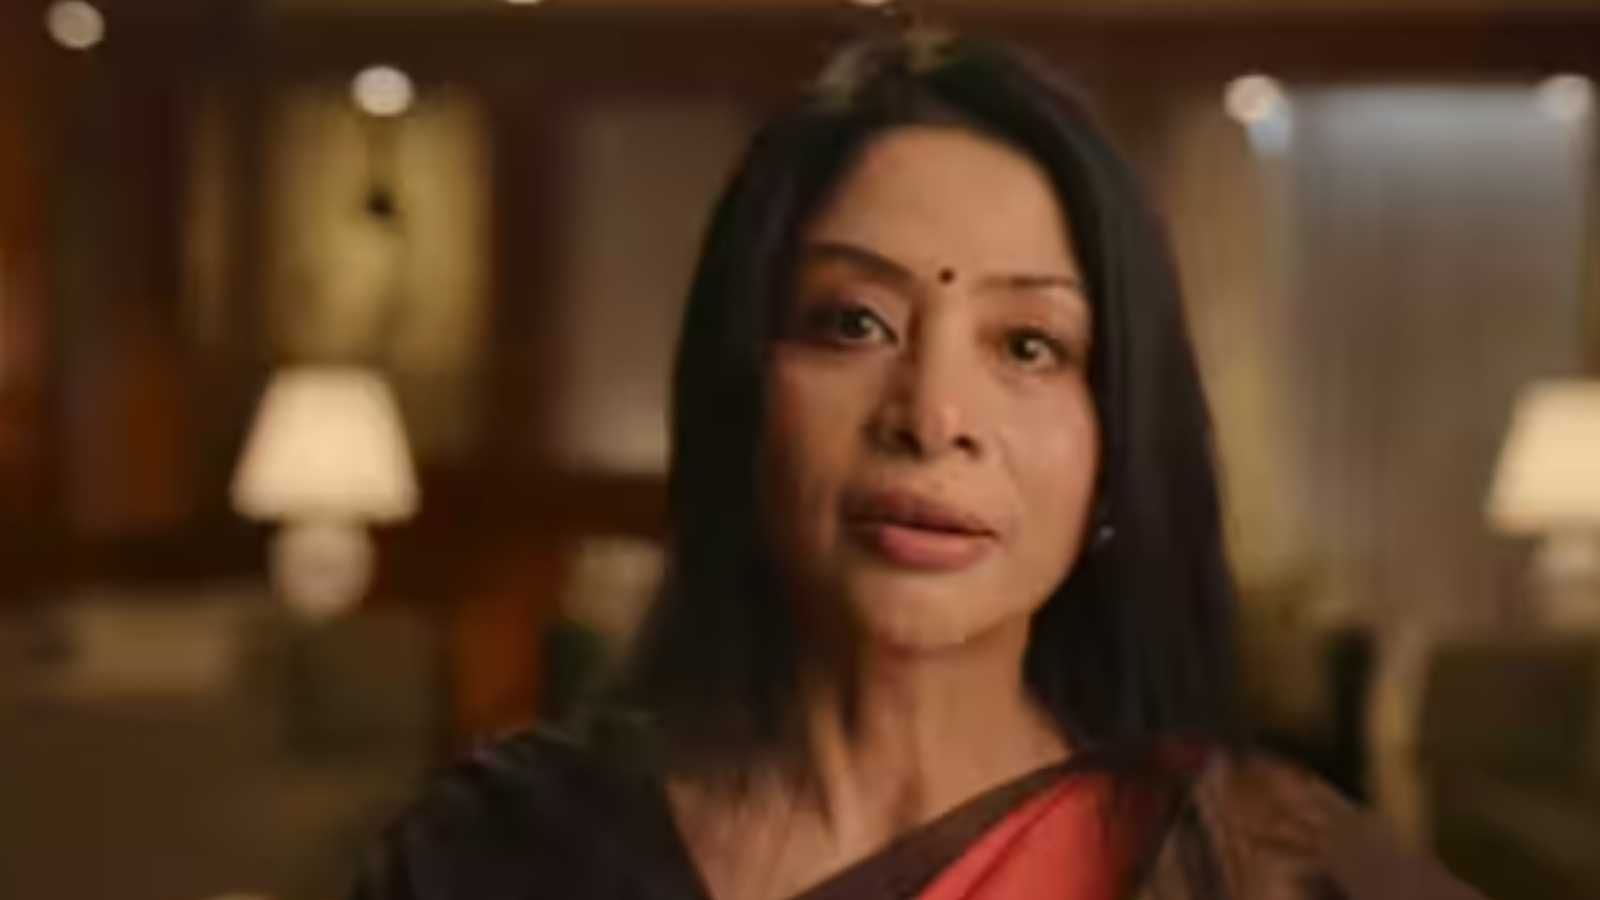 The Indrani Mukerjea Story: The Buried Truth